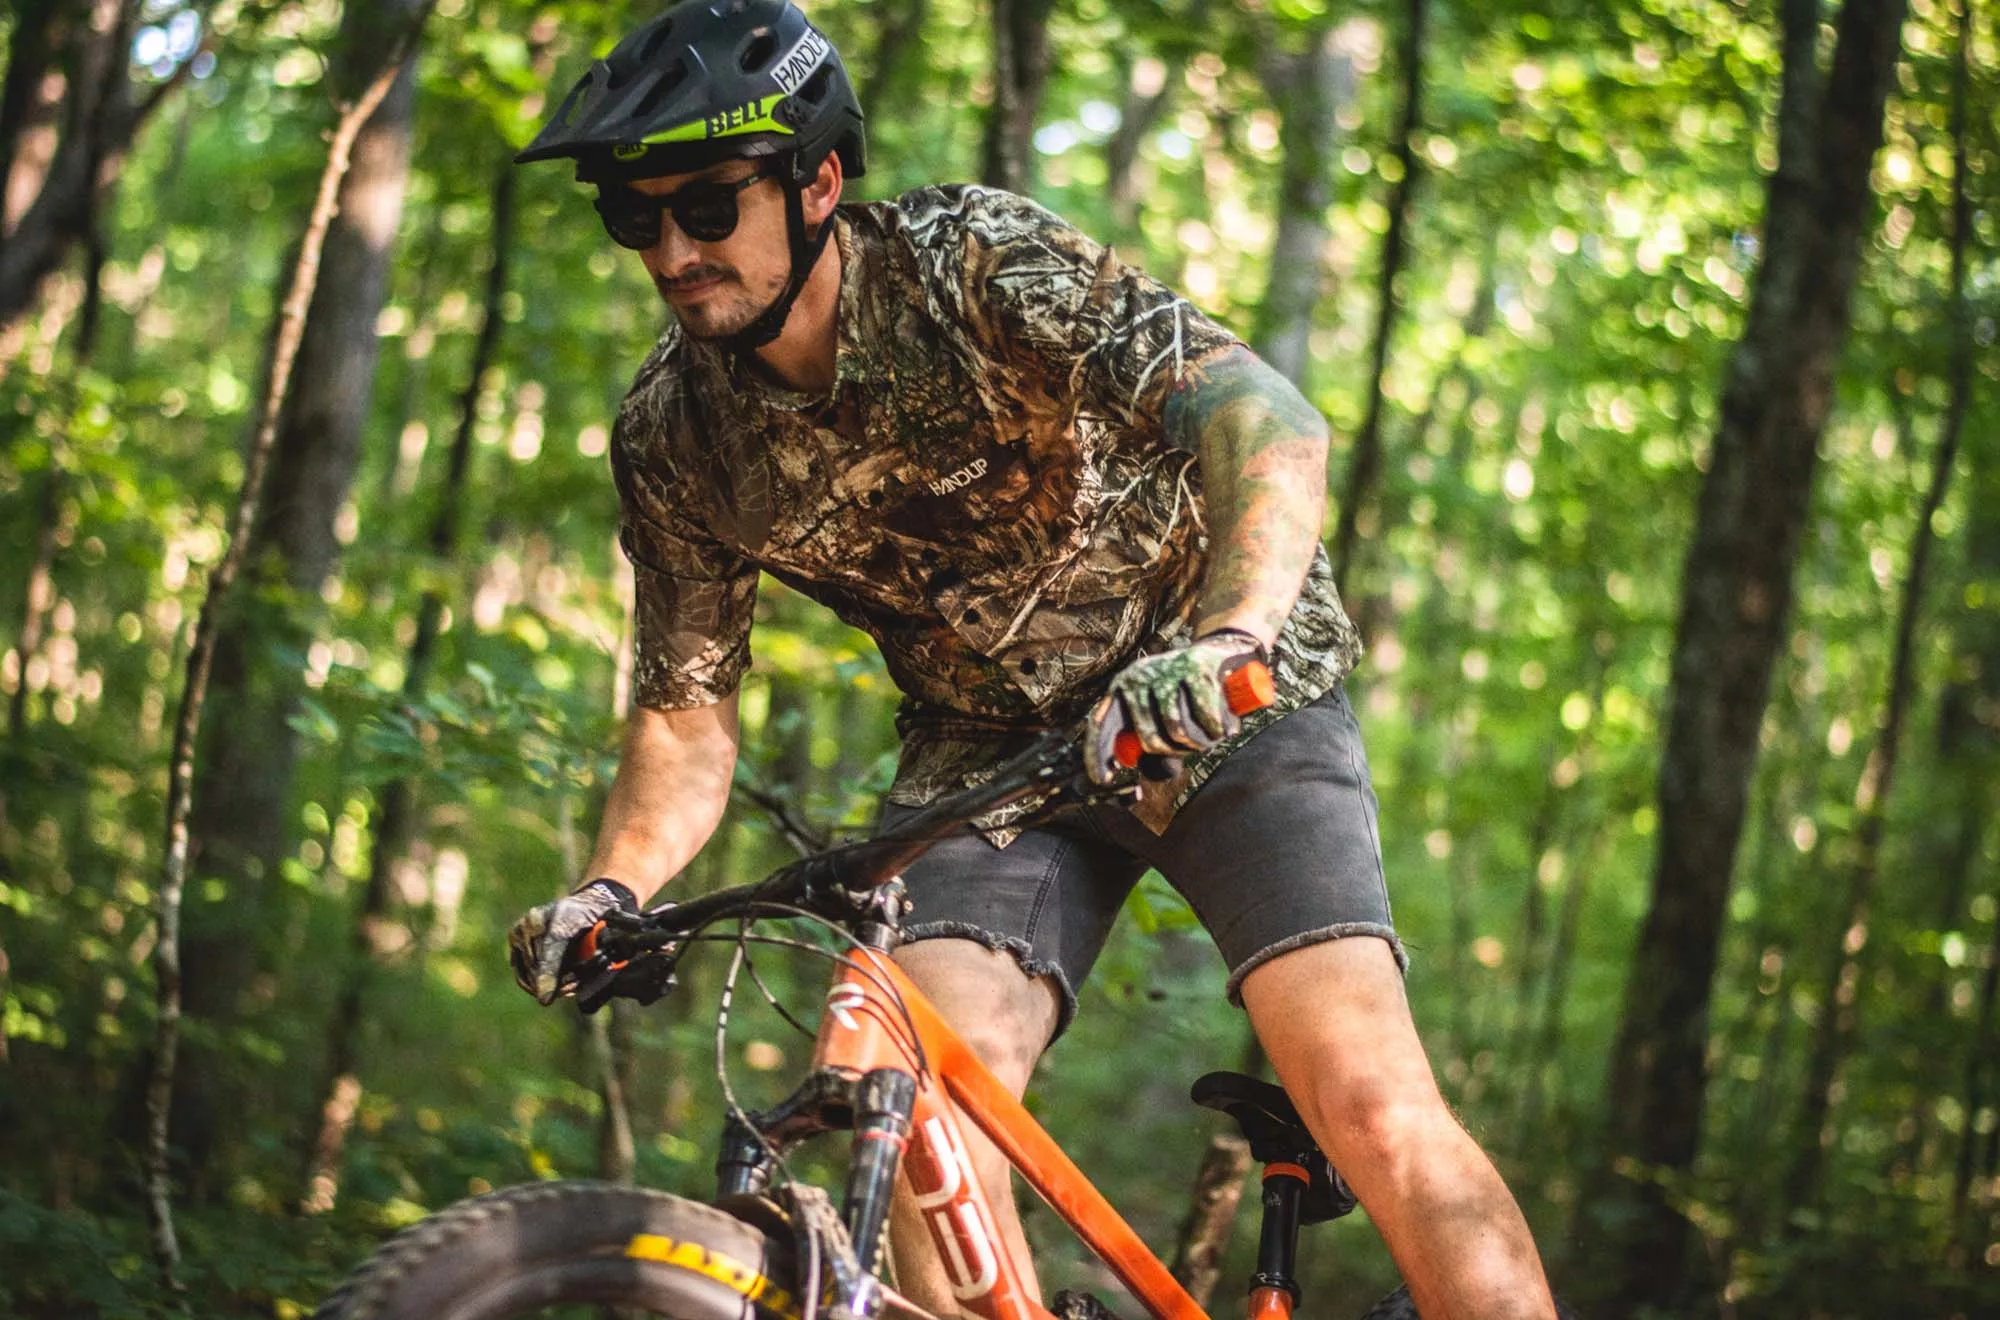 Handup x Realtree Camo MTB collection makes you stand out